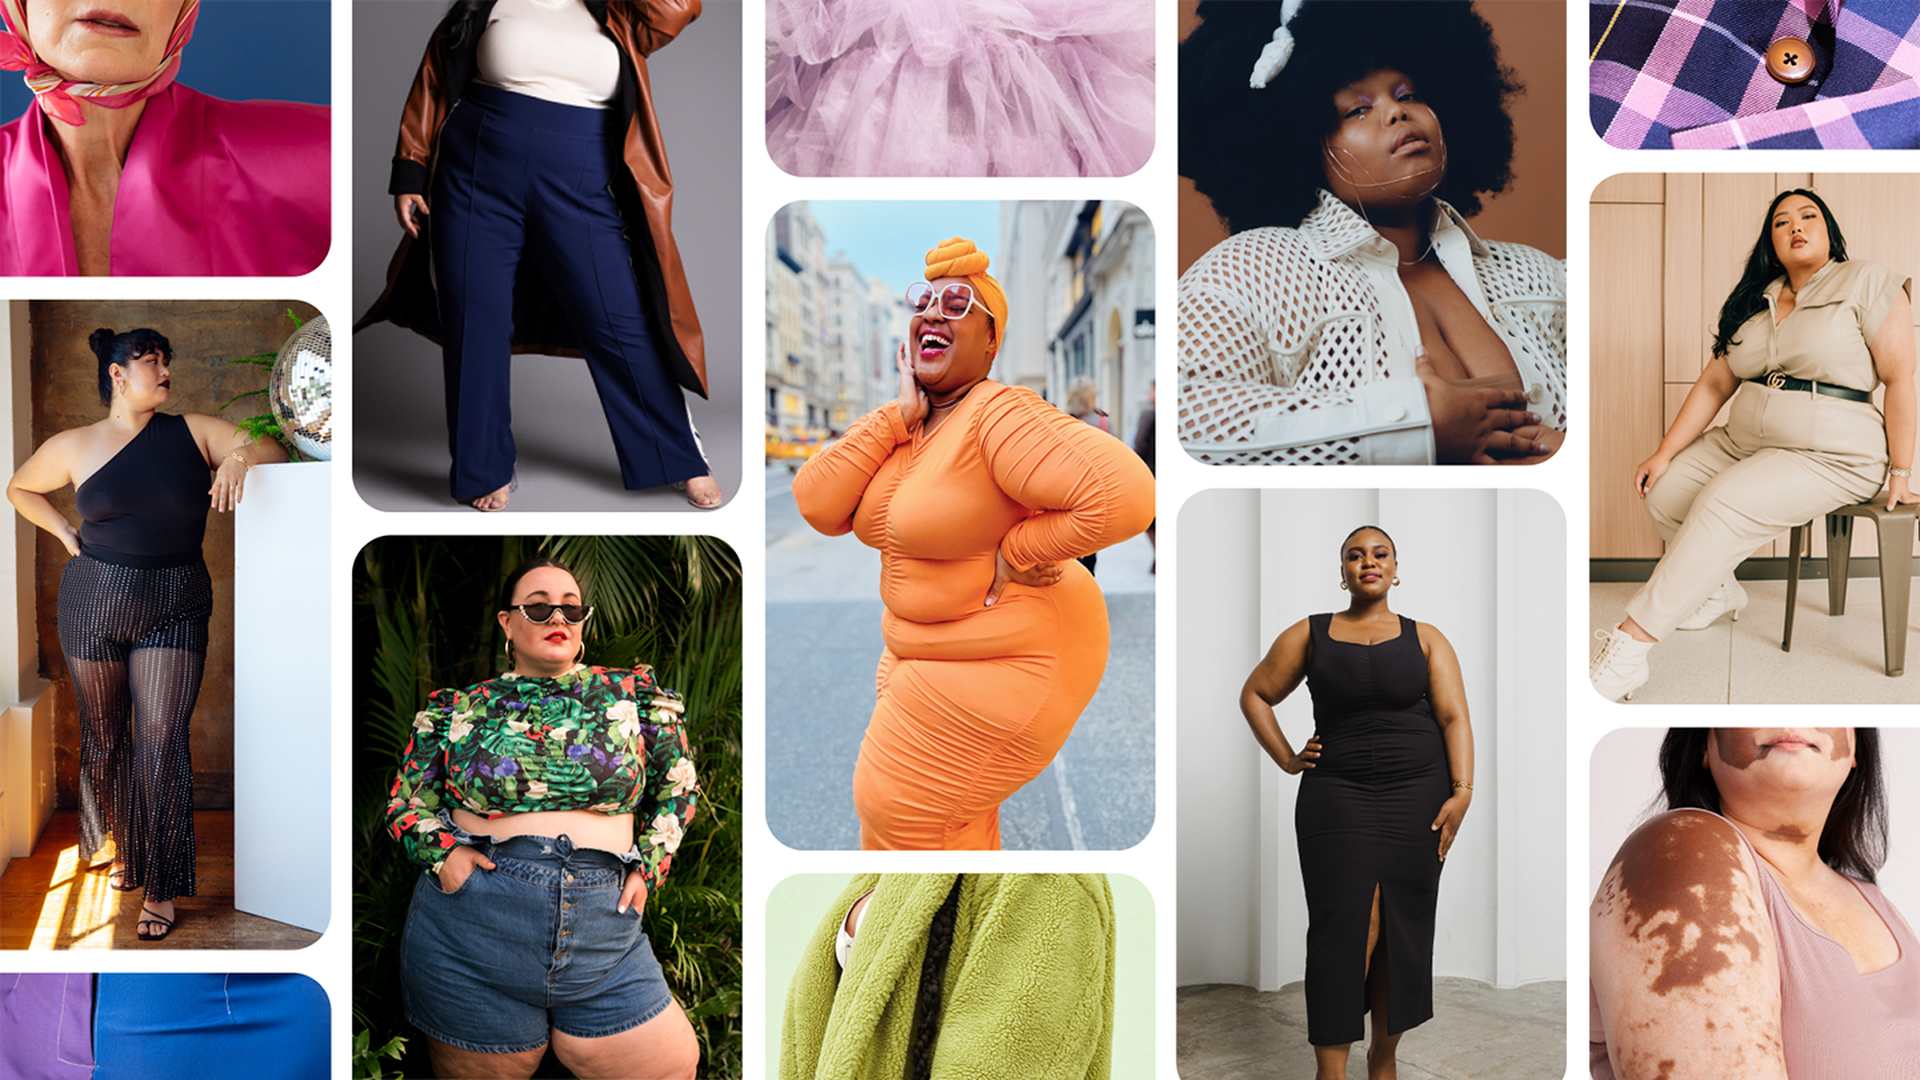 A collage image of women of varying body types